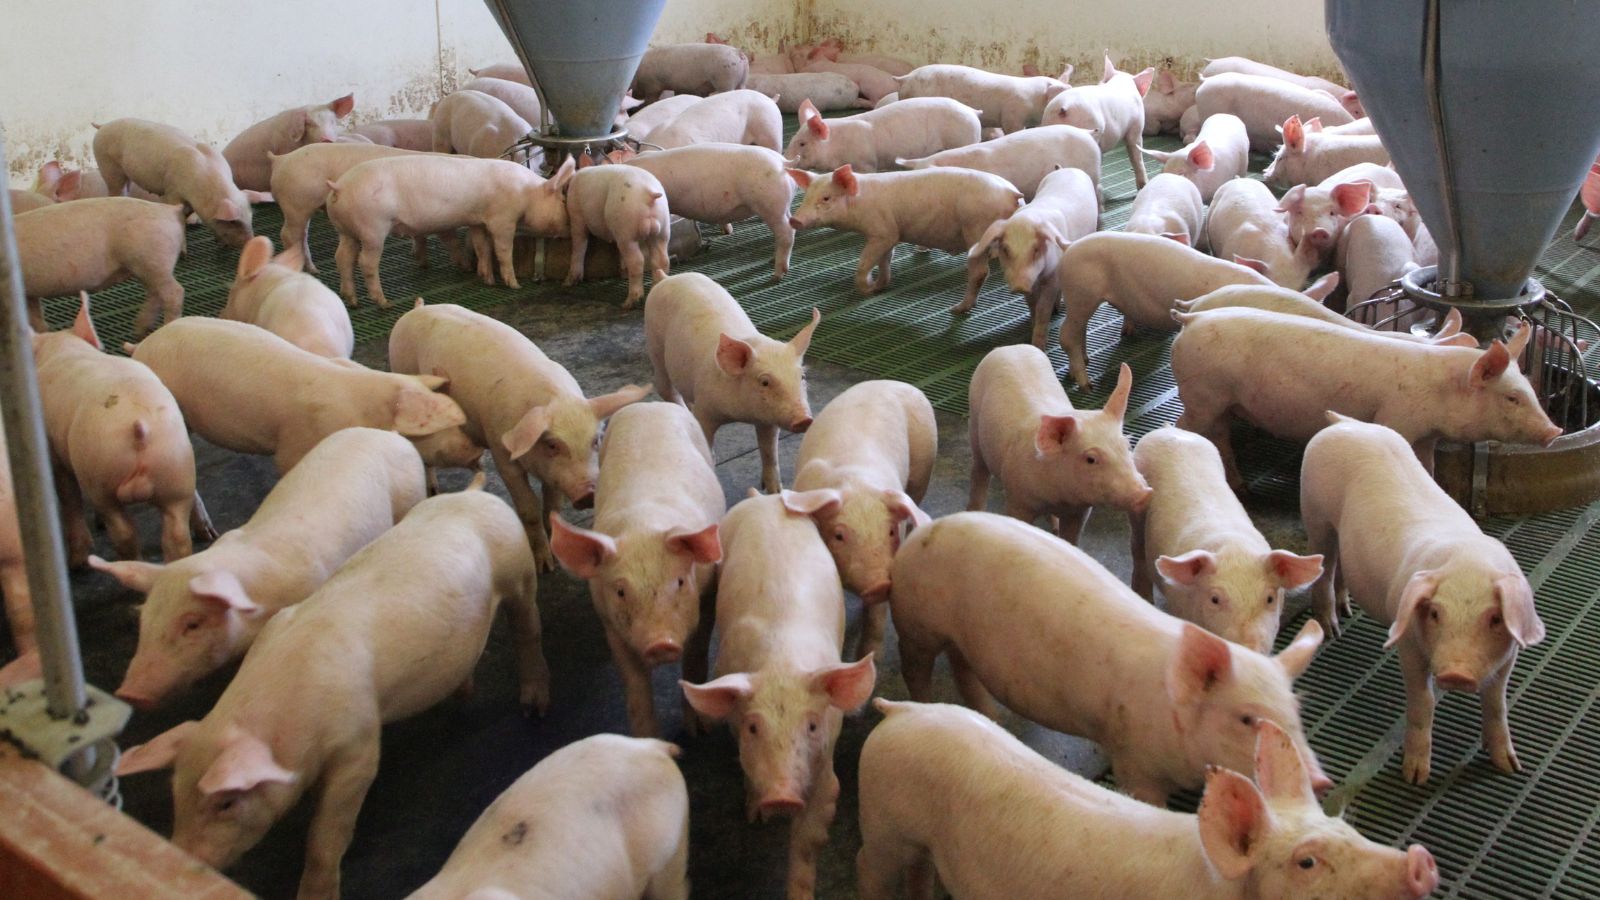 Group of housed pigs on plastic slats